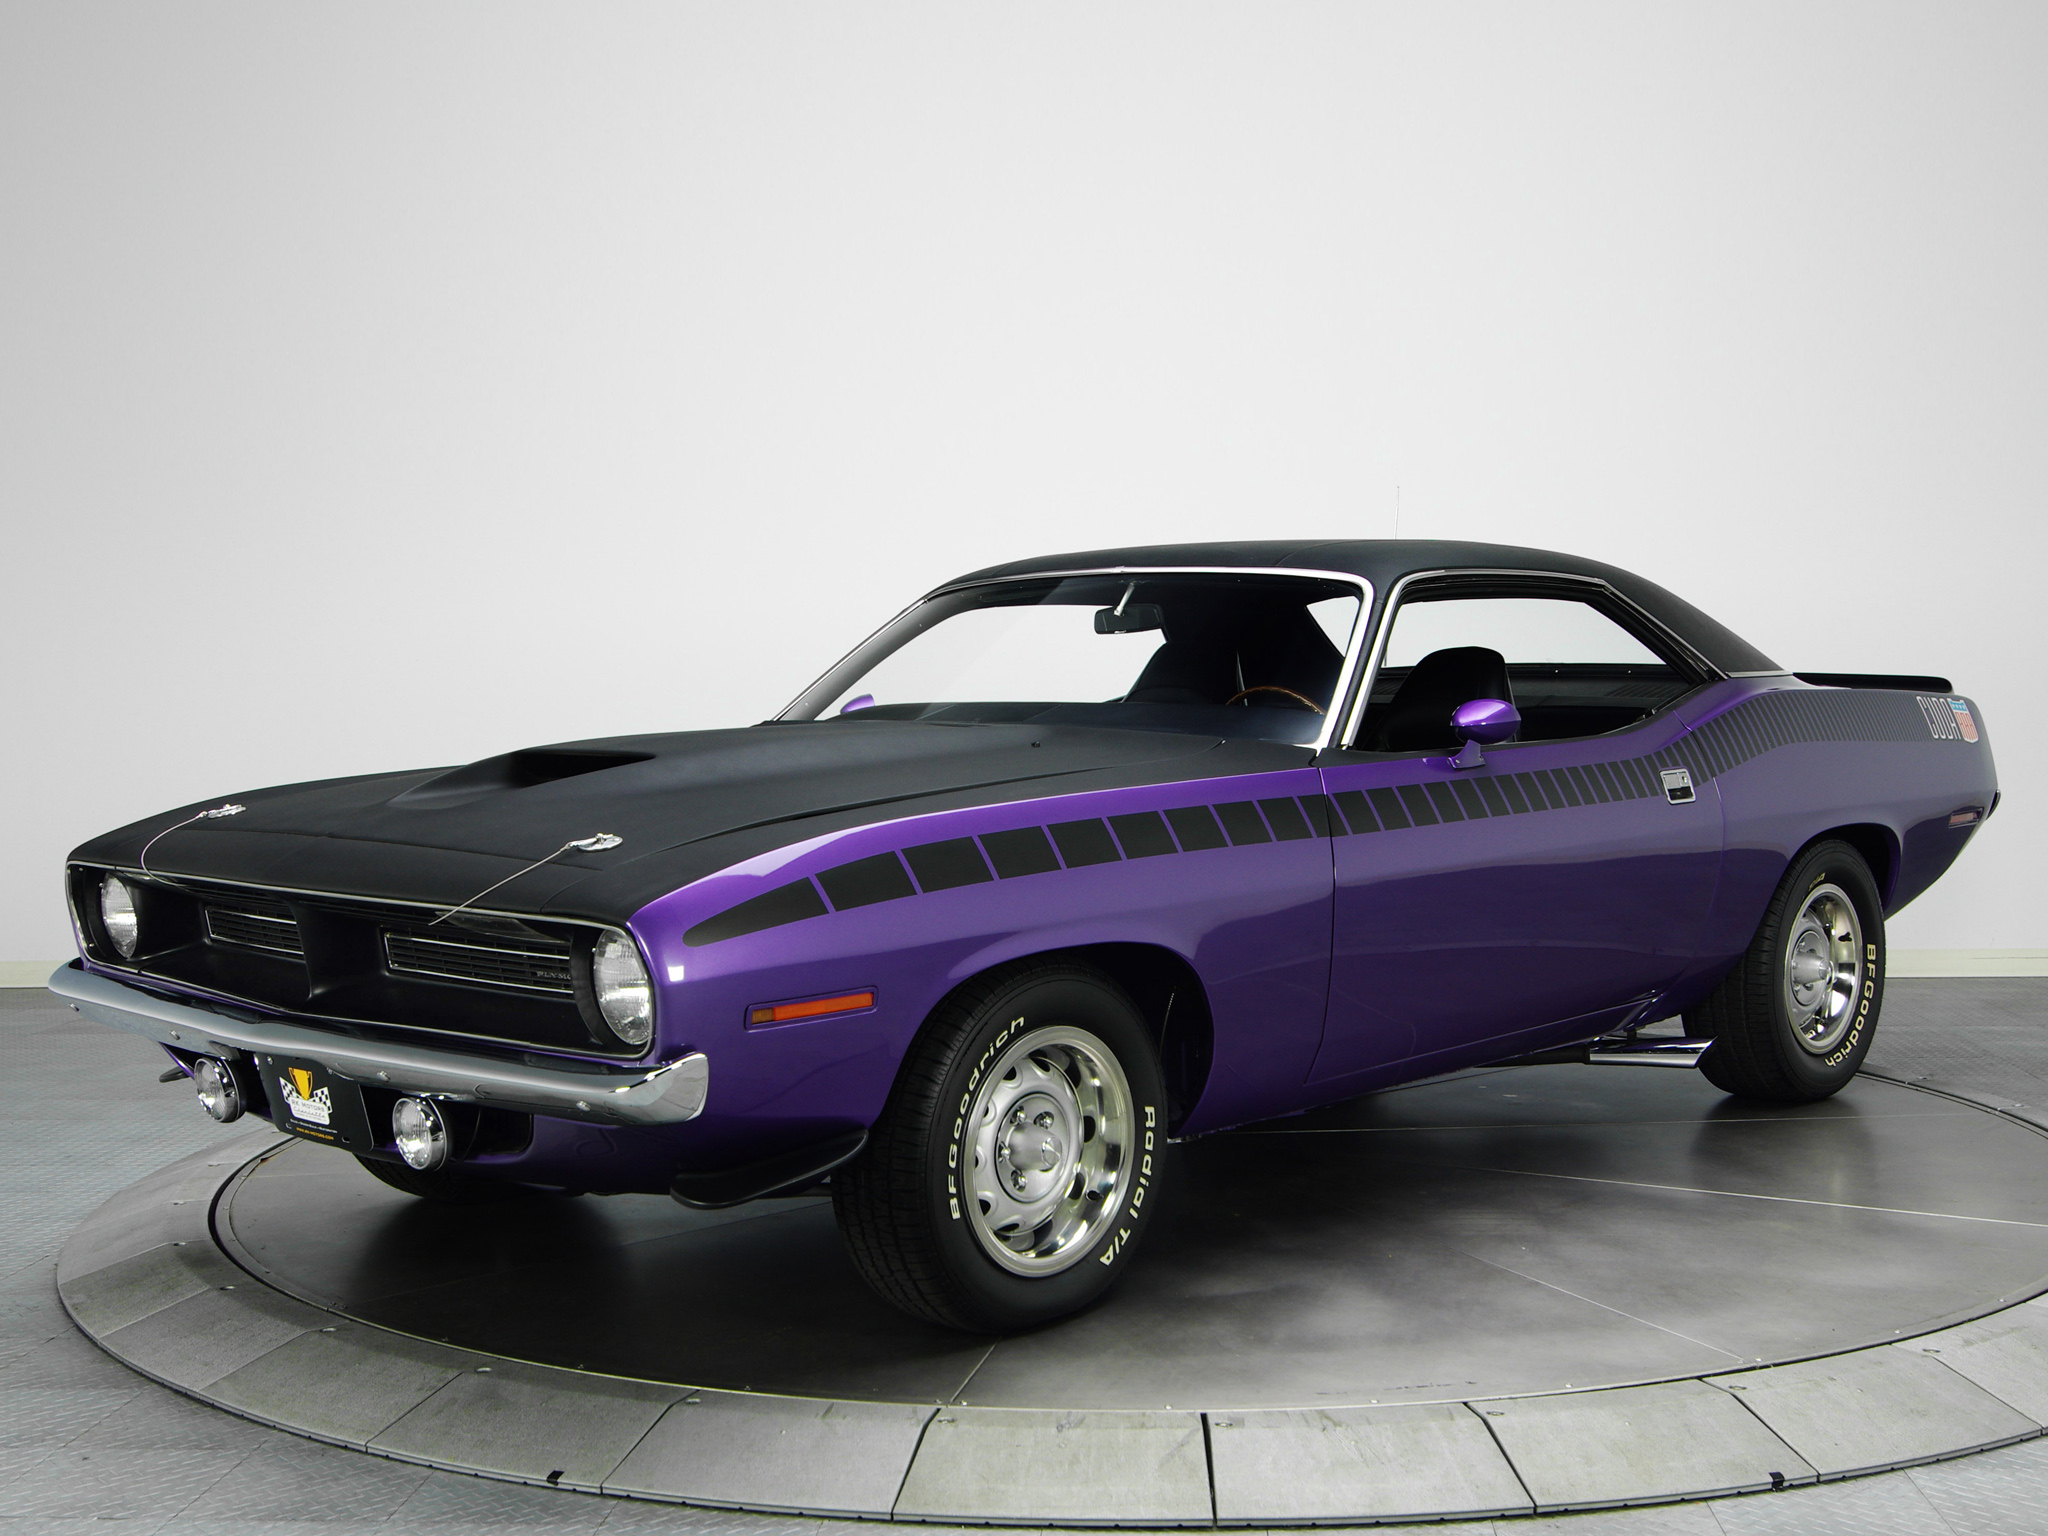 Free download 1970 Plymouth AAR Cuda BS23 muscle classic g wallpaper [2048x1536] for your Desktop, Mobile & Tablet. Explore Cuda Wallpaper. Plymouth Cuda Wallpaper, Hemi Cuda Wallpaper, 1971 Hemi Cuda Wallpaper